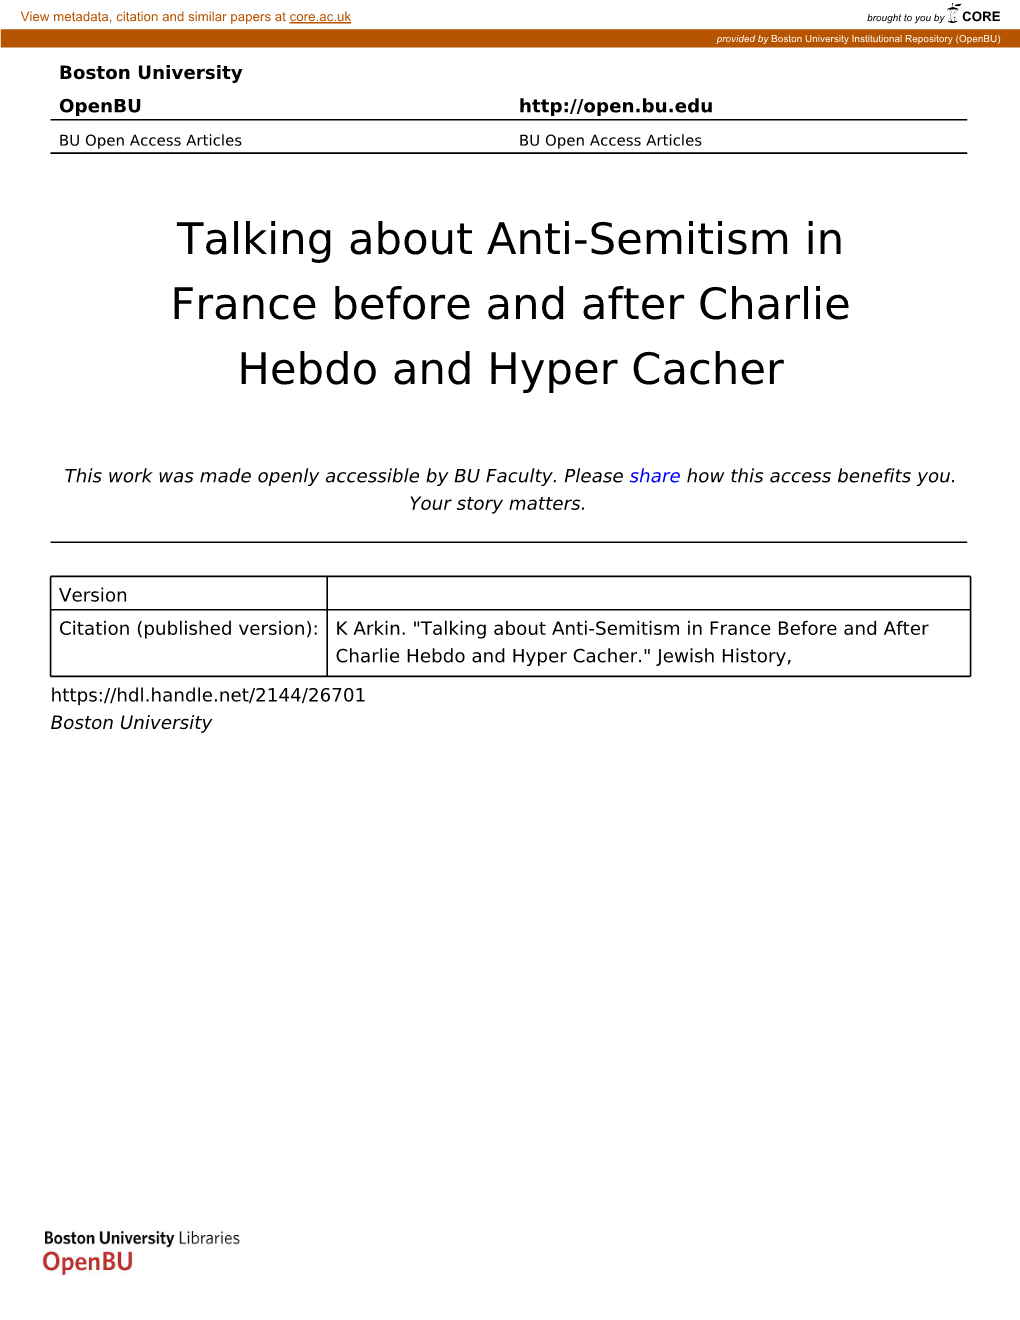 Talking About Anti-Semitism in France Before and After Charlie Hebdo and Hyper Cacher